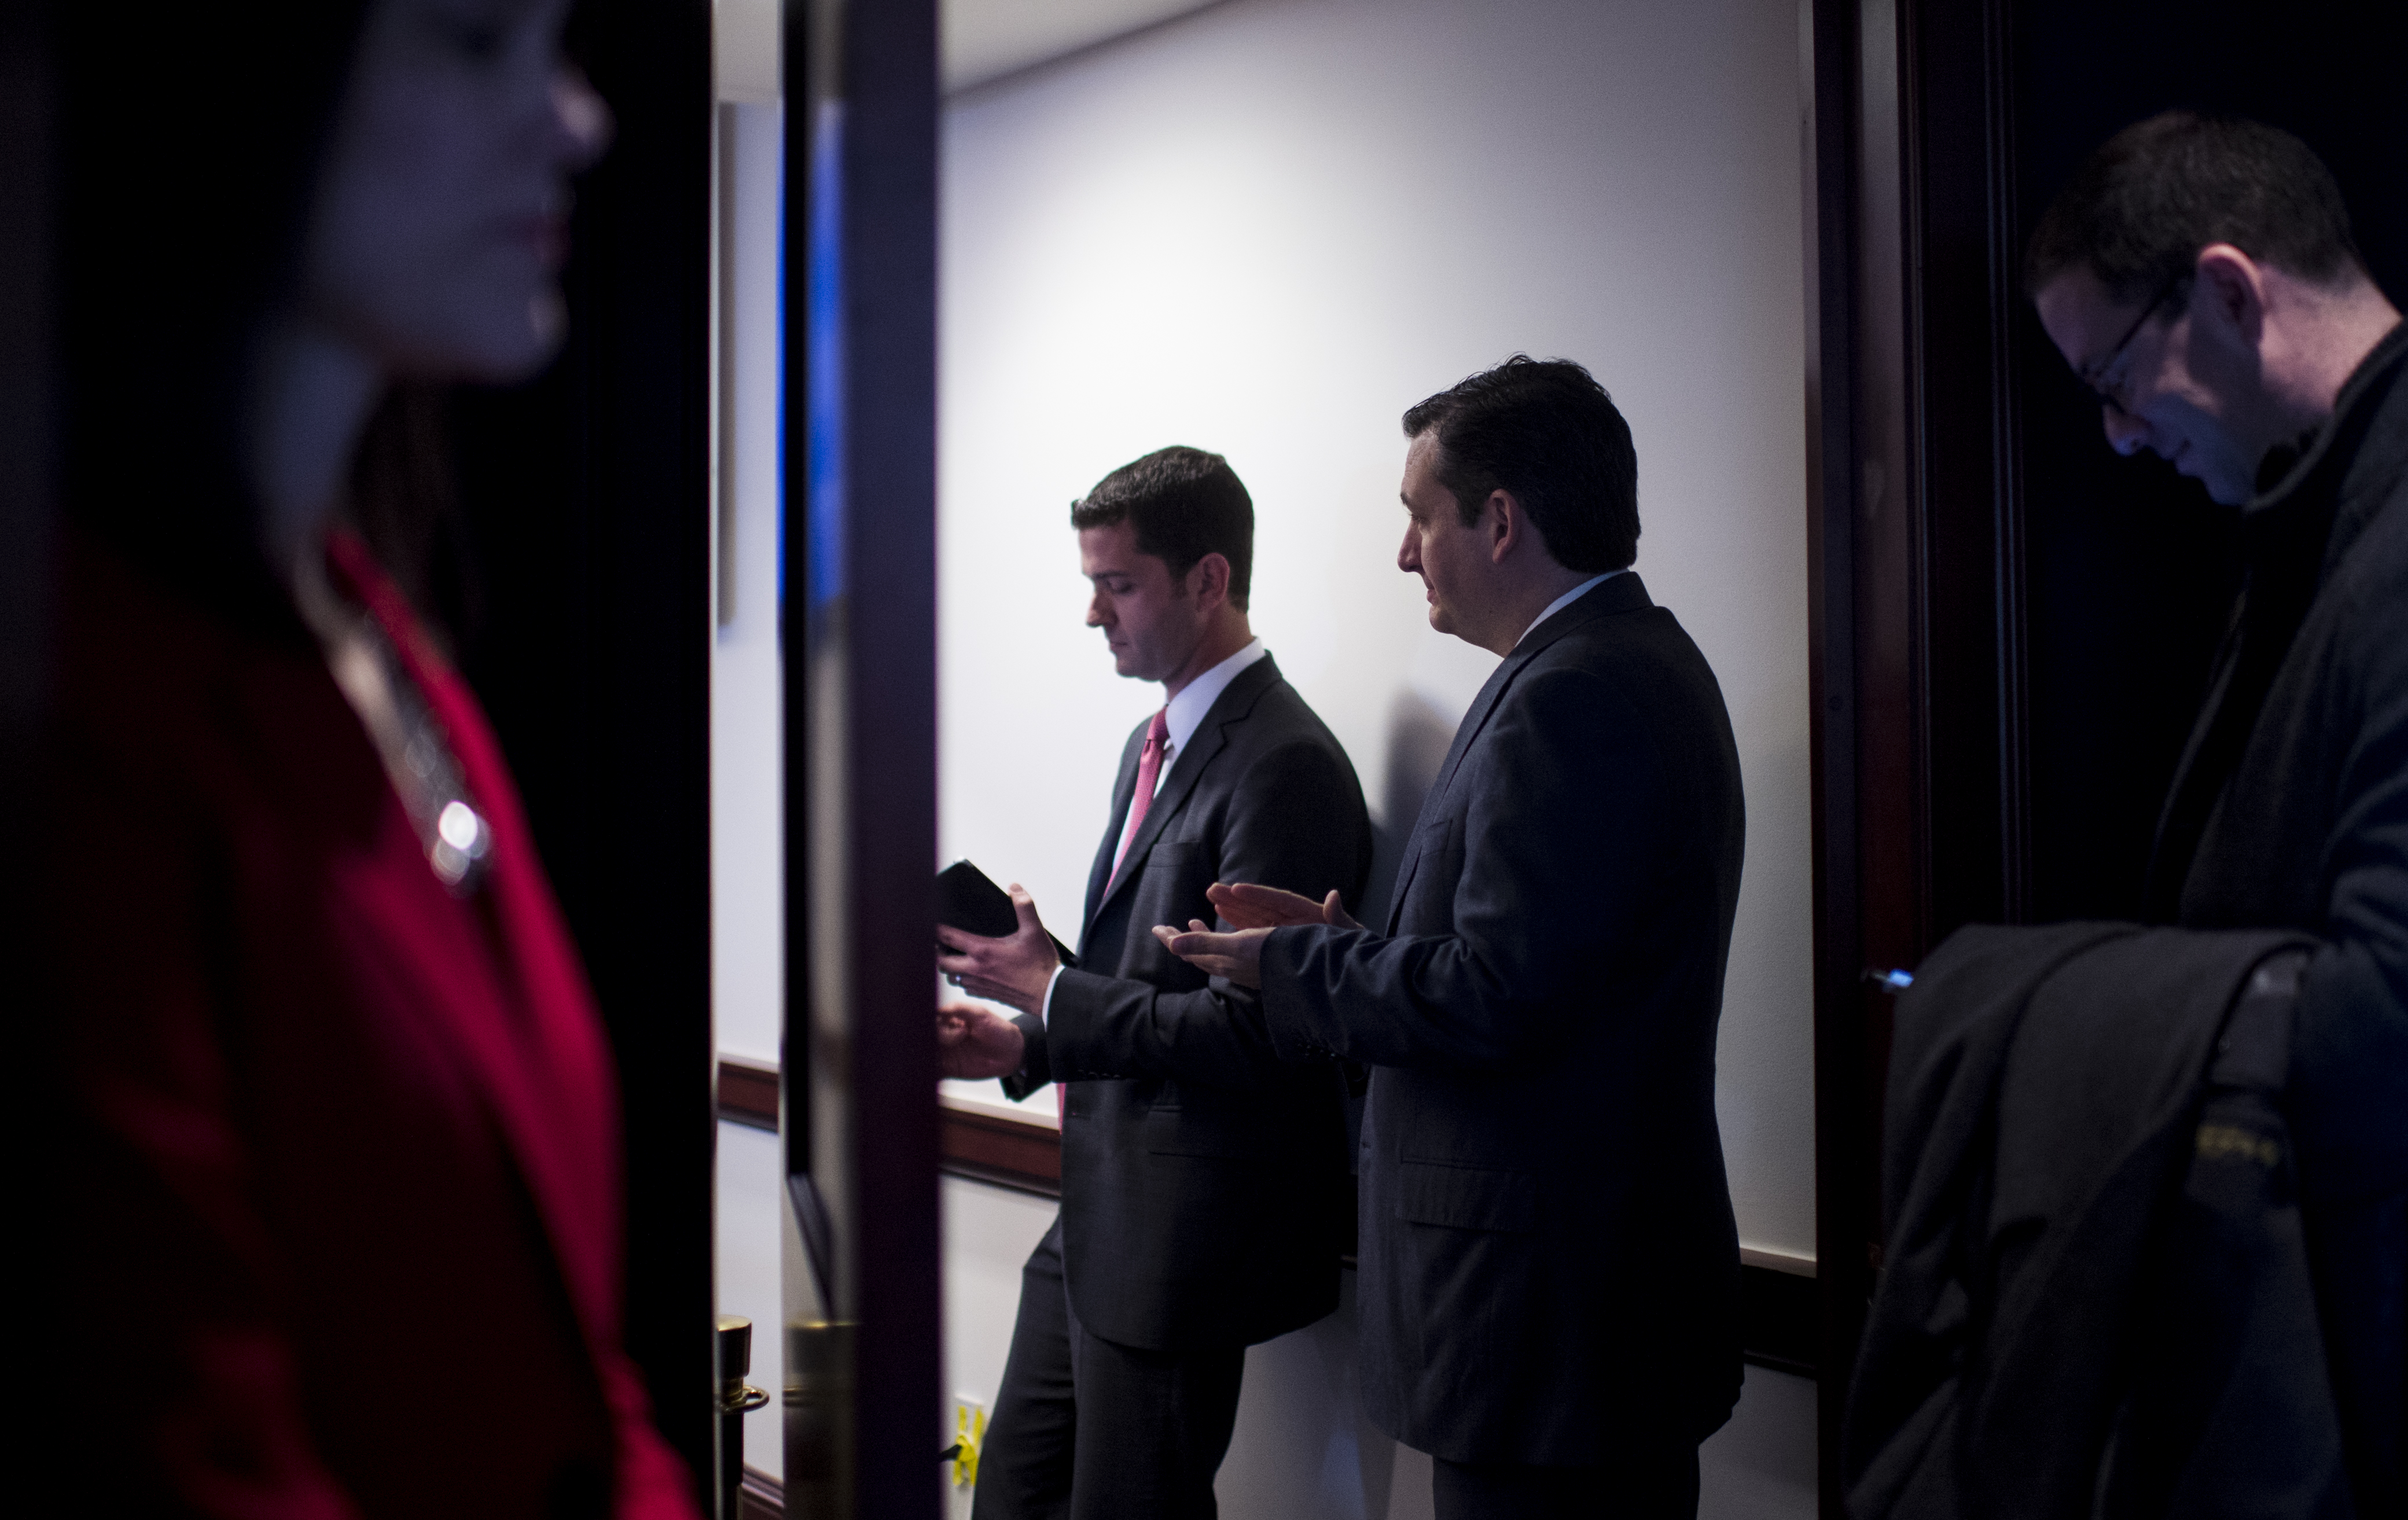 Sen. Ted Cruz (R-Texas) and Heritage Action CEO Mike Needham at the Conservative Policy Summit in Washington on Monday, Feb. 10, 2014. (Bill Clark&mdash;CQ-Roll Call/Getty Images)